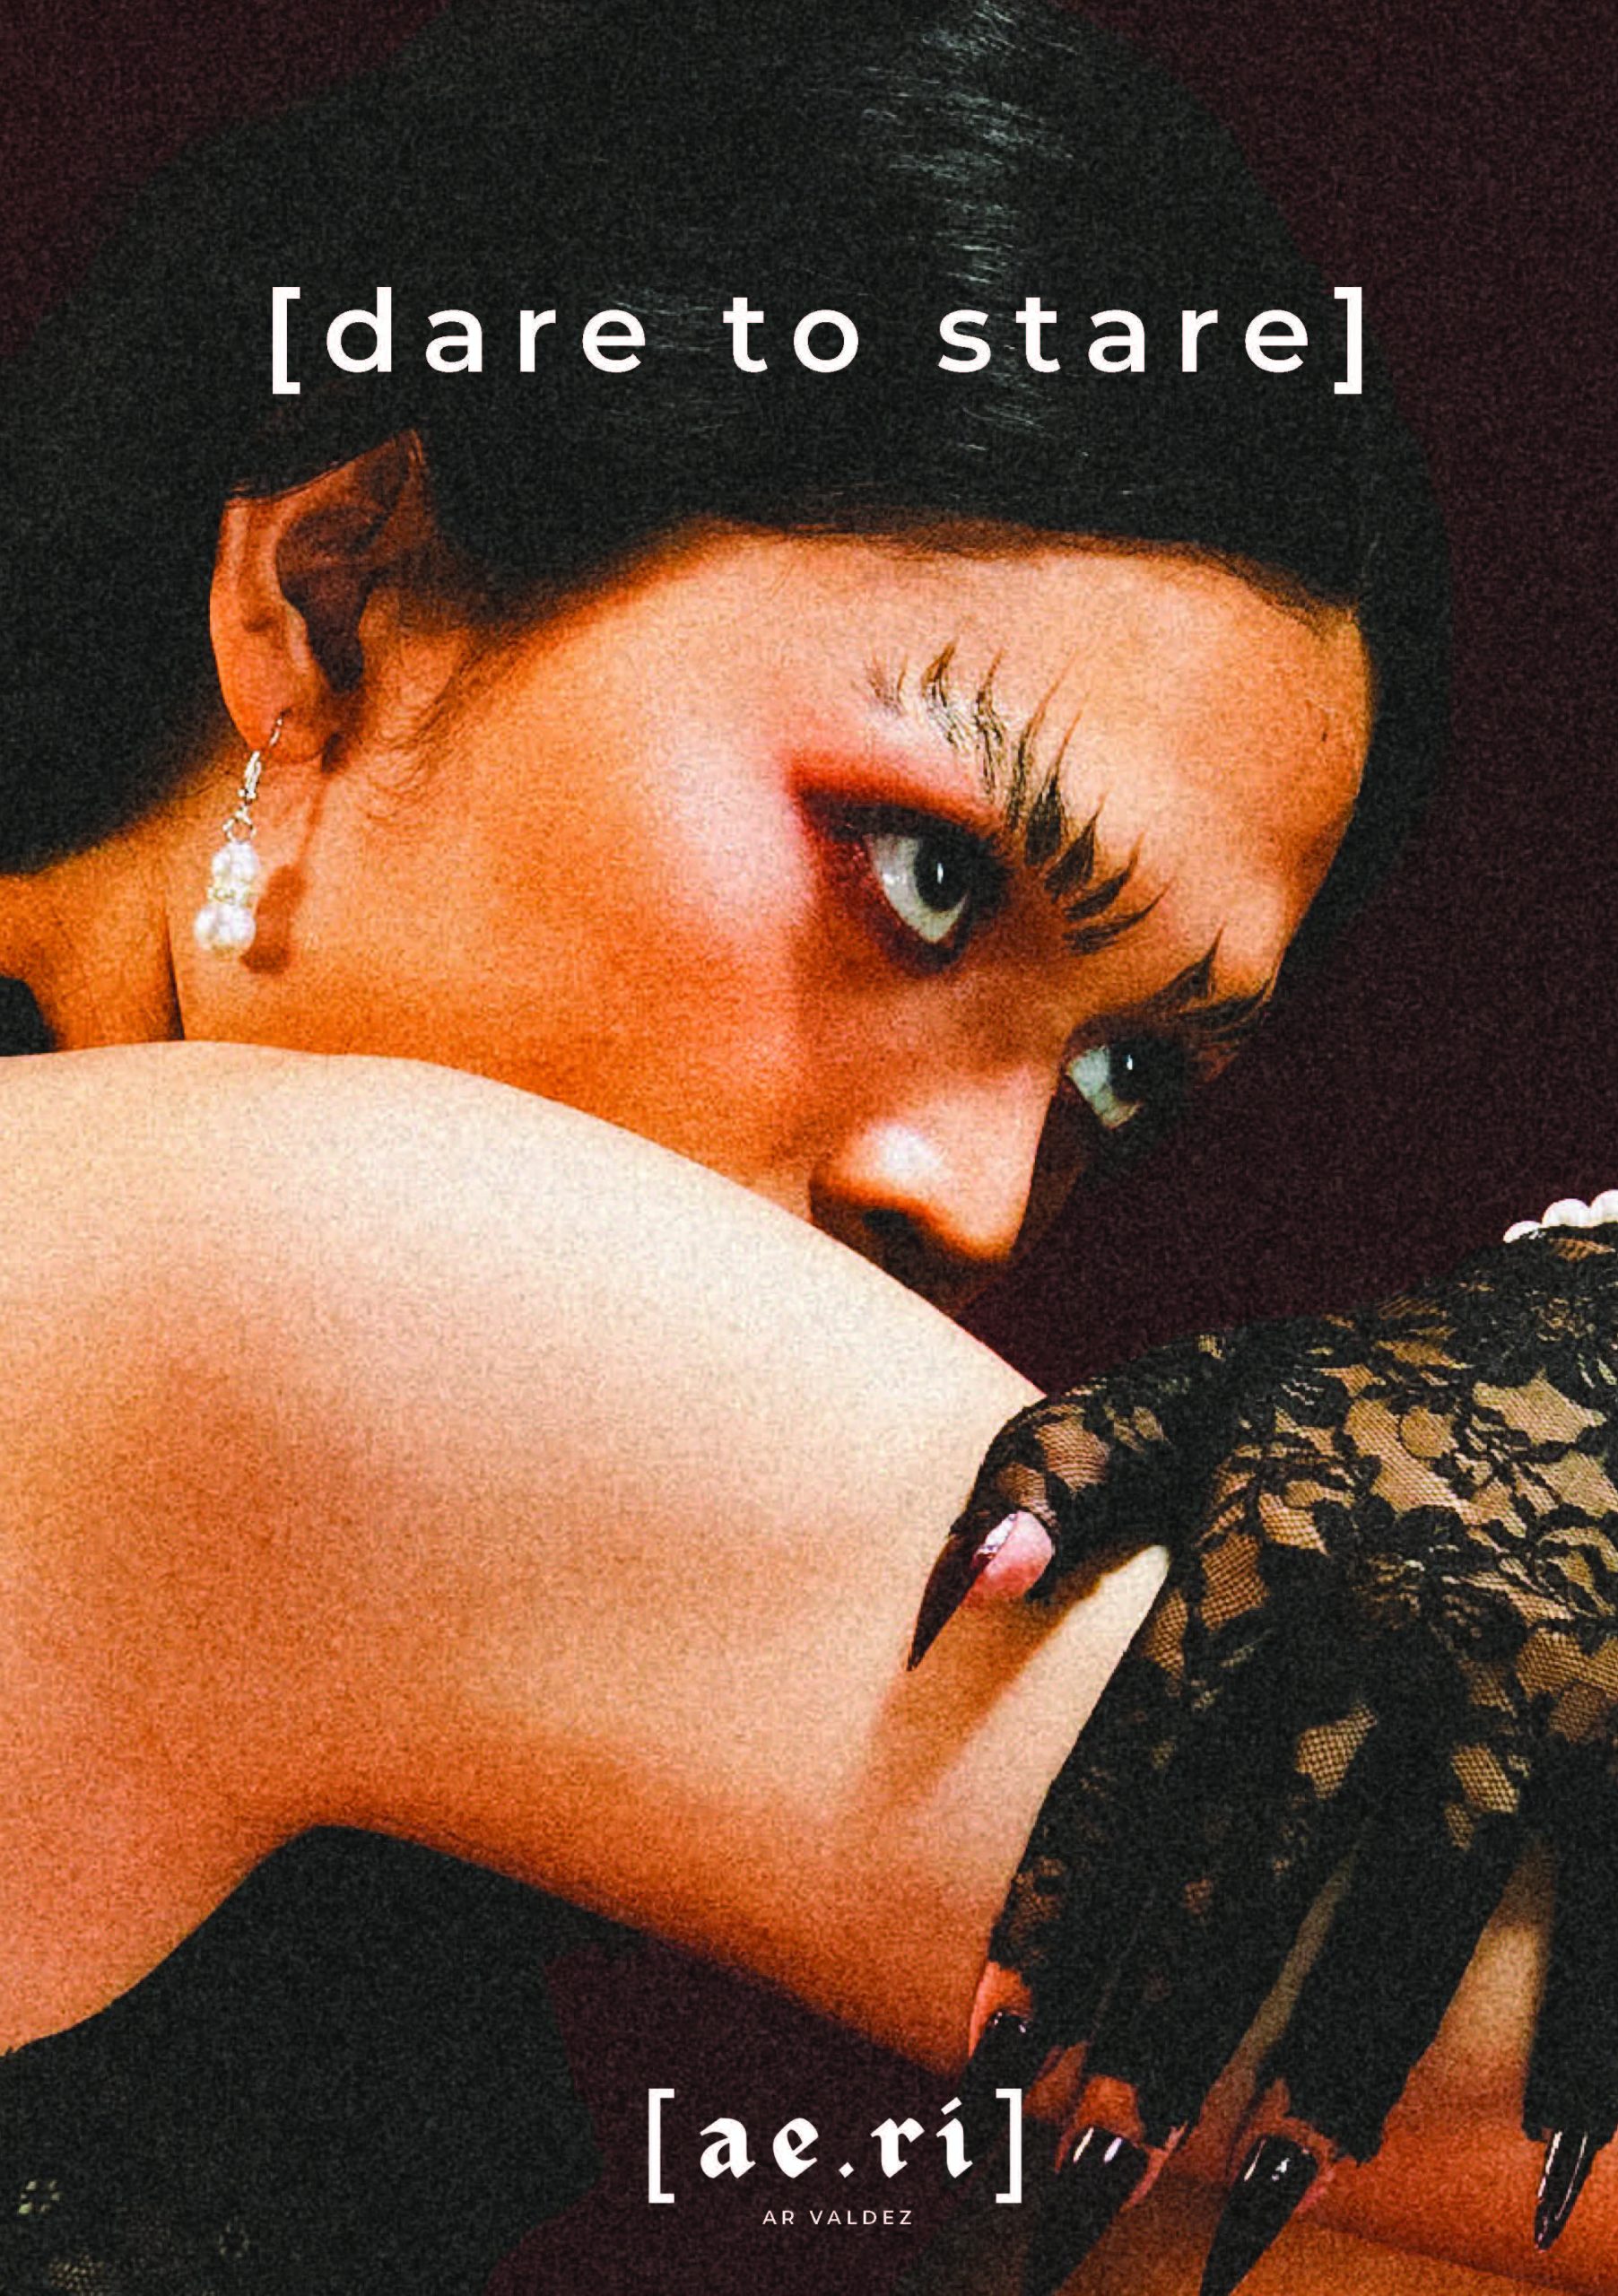 Read more about the article [dare to stare] by Valdez, Ar